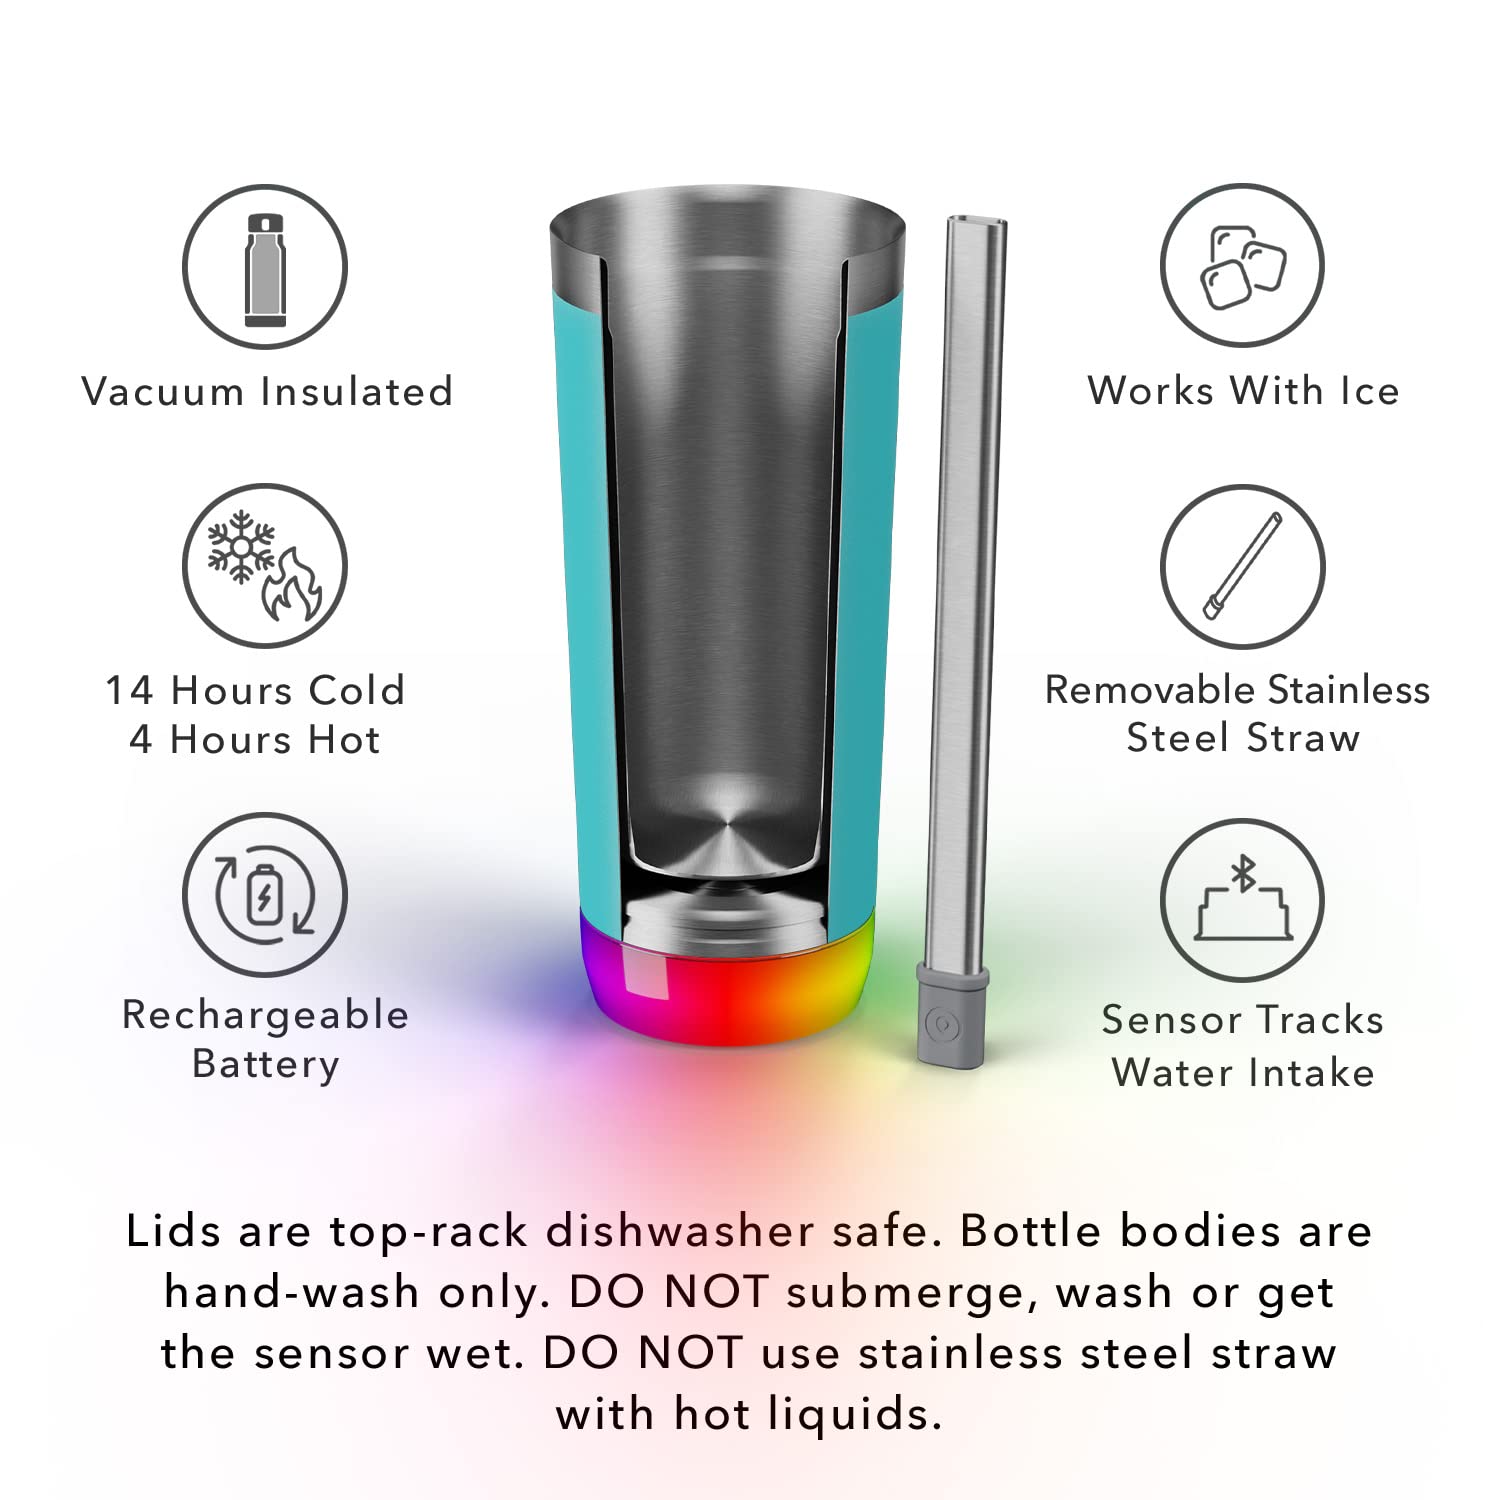 Hidrate Spark PRO Smart Tumbler with Lid & Straw – Insulated Stainless Steel – Tracks Water Intake with Bluetooth, LED Glow Reminder When You Need to Drink – 20oz, Sea Glass